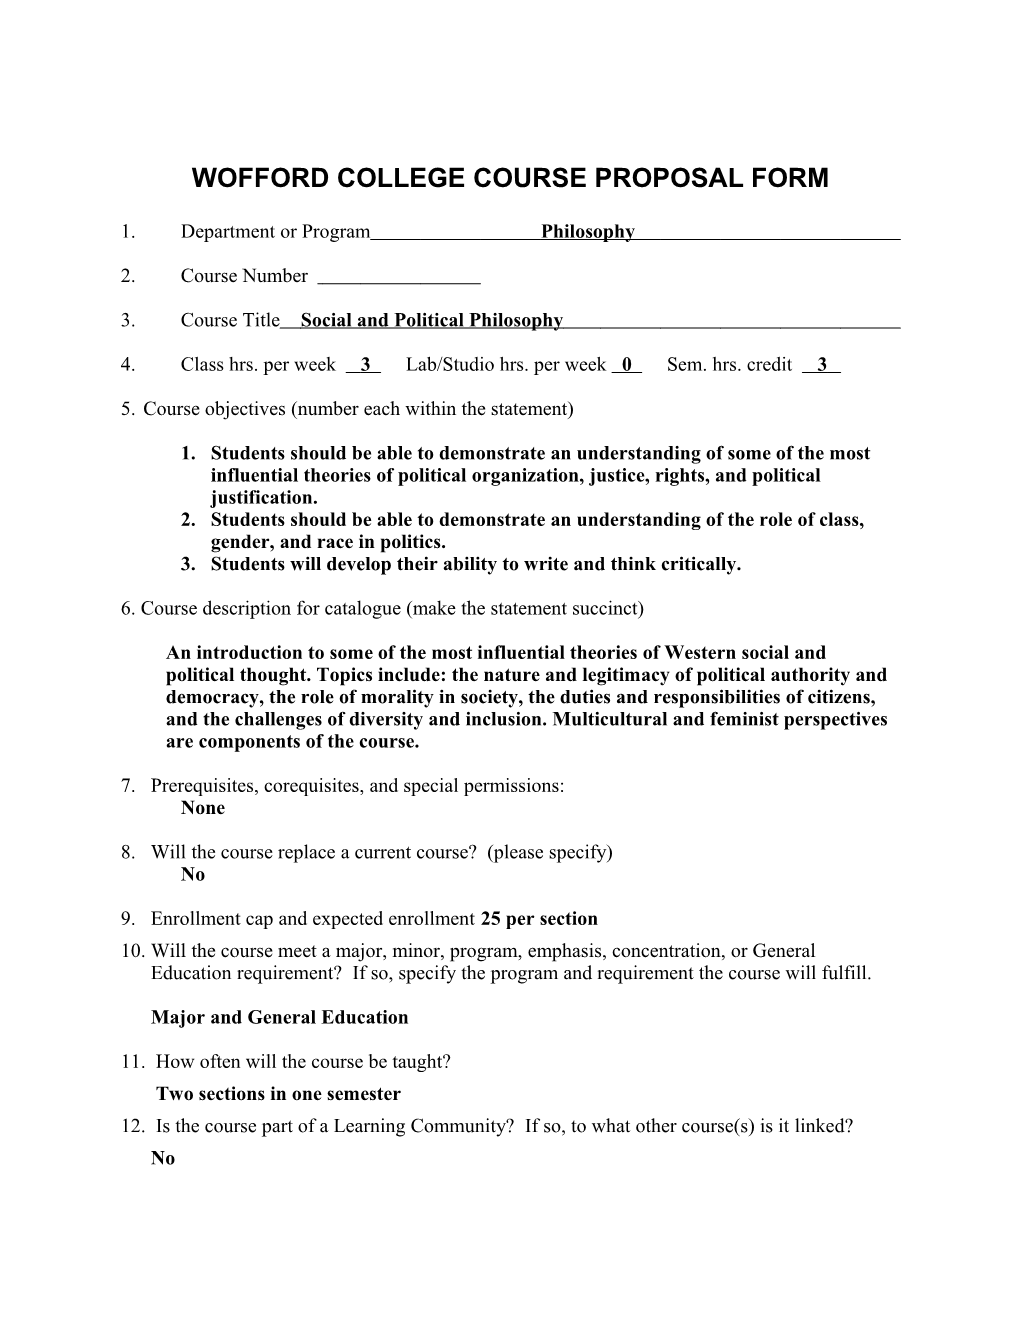 Wofford College Course Proposal Form